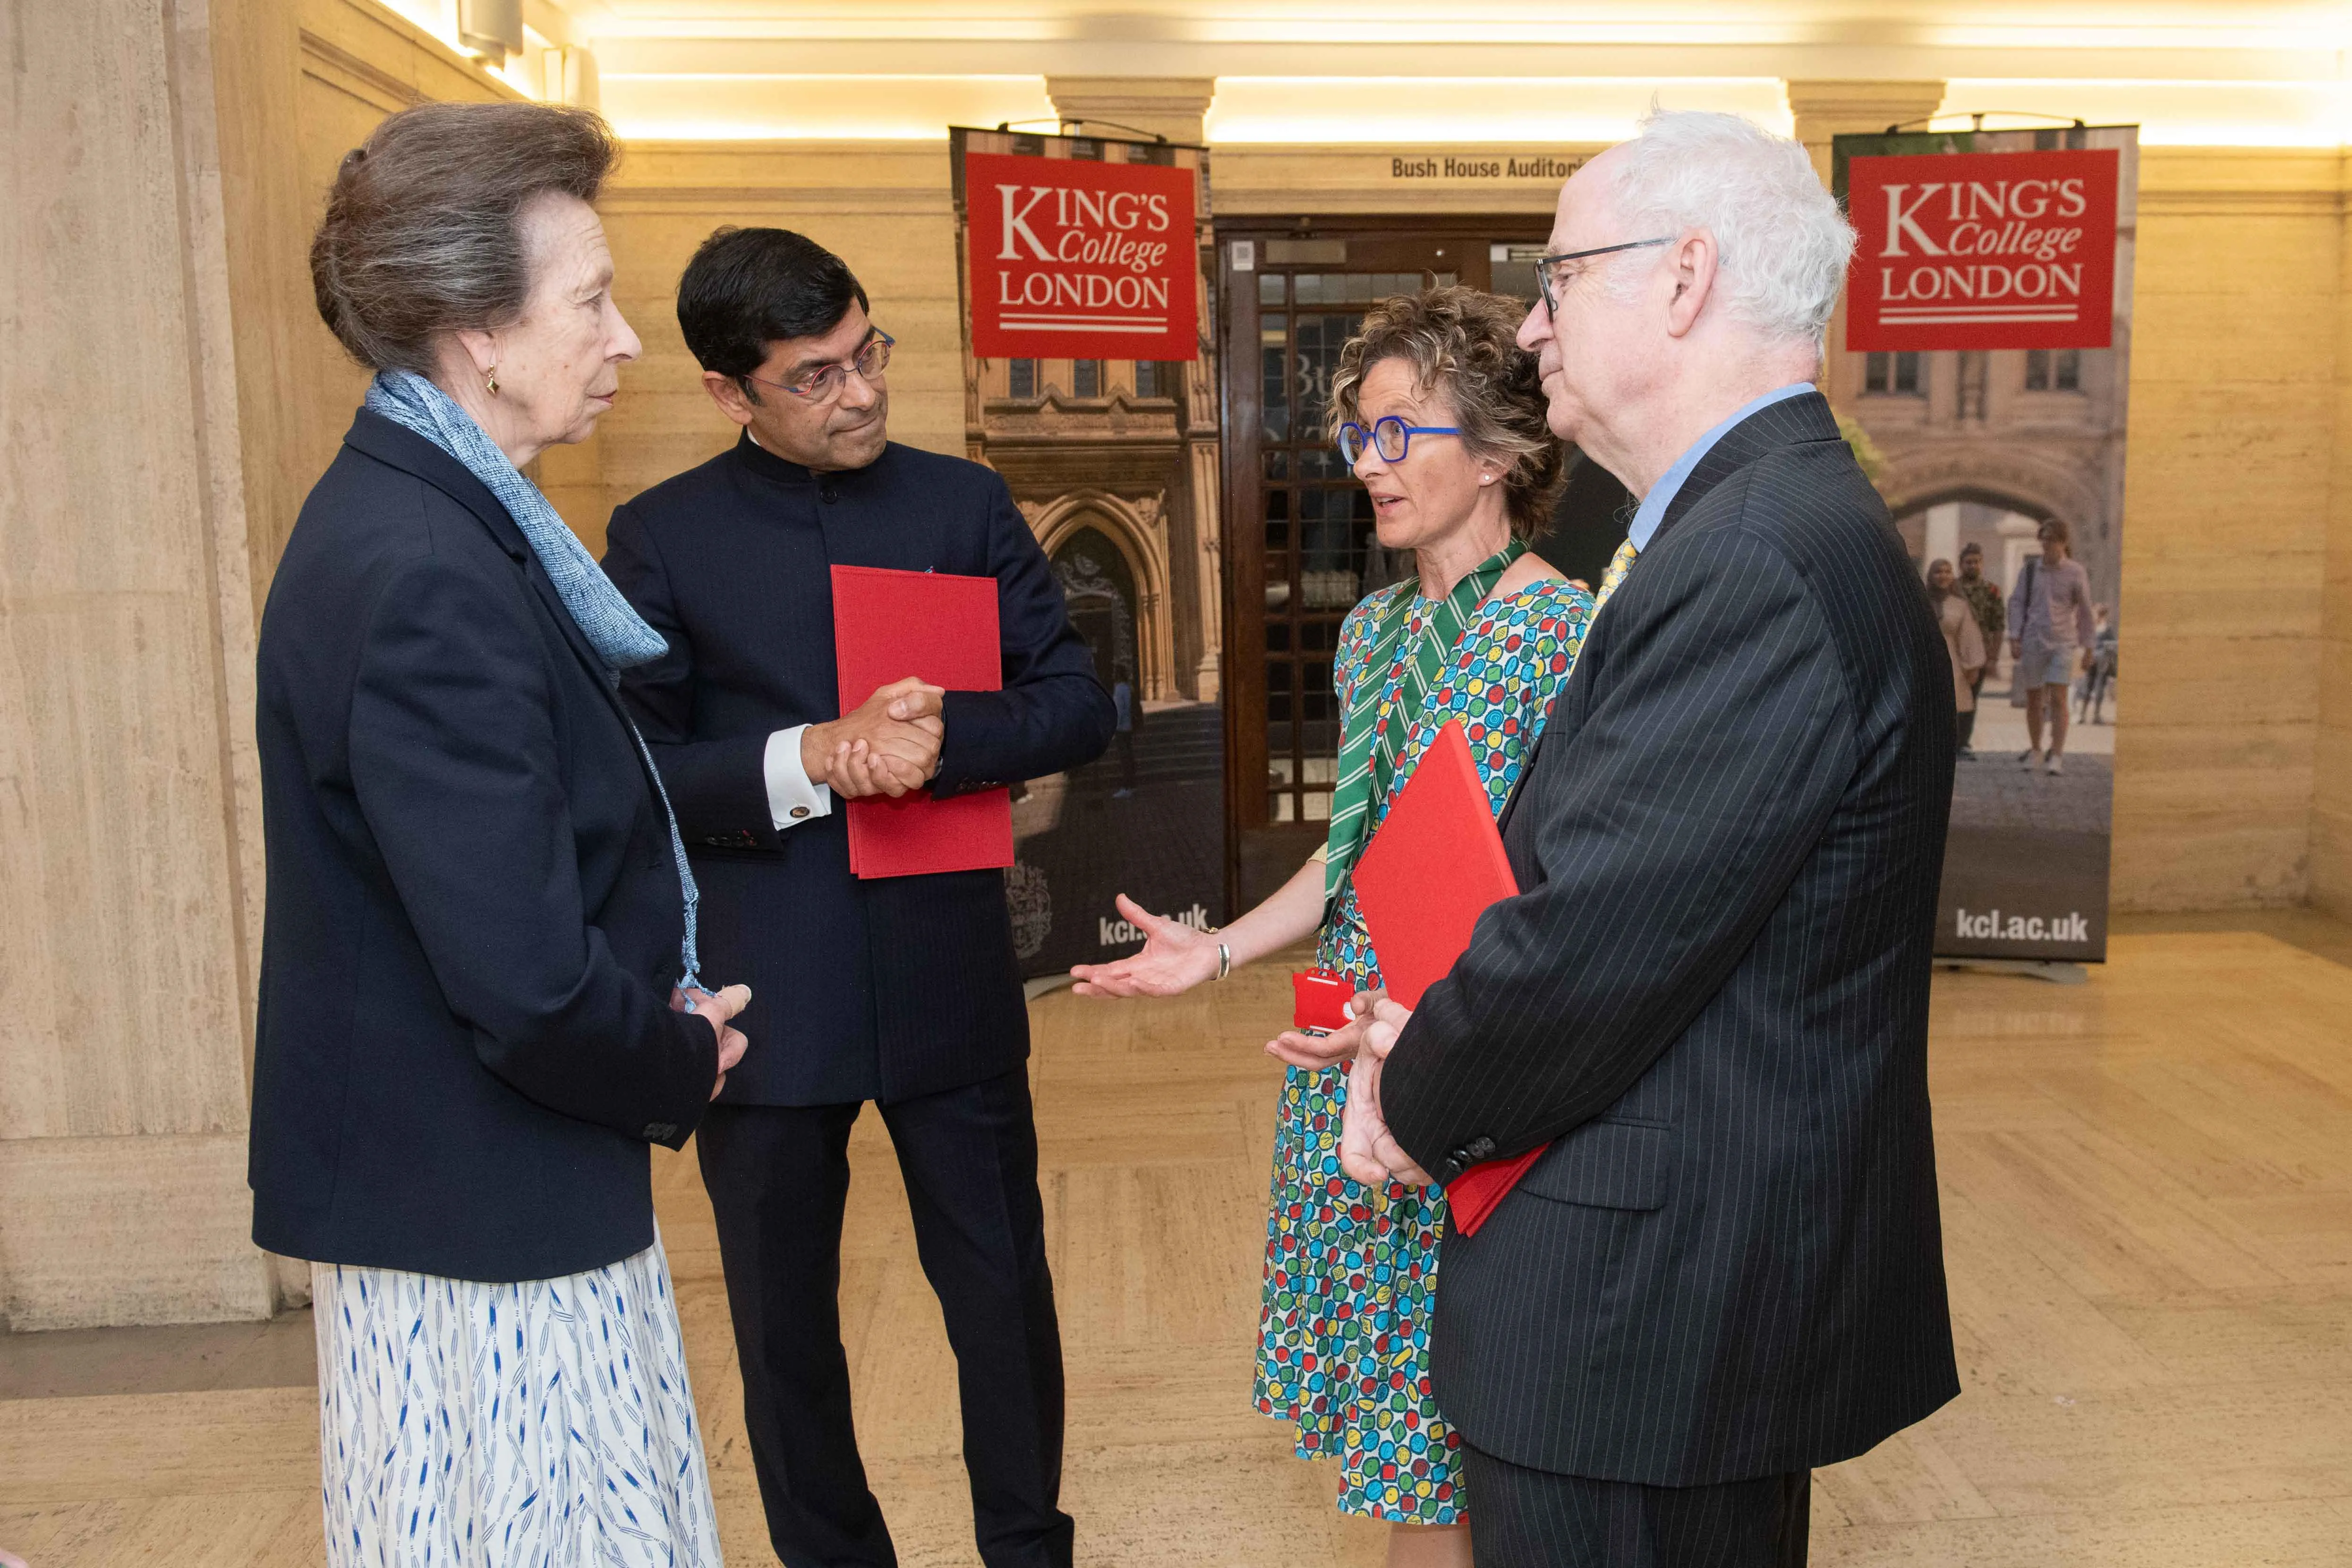 Her Royal Highness, Professor Shitij Kapur, Vice-Chancellor of King's College London, Professor Nicola Fear Co-director of KCMHR and Professor Sir Simon Wessely, Chair of KCMHR.